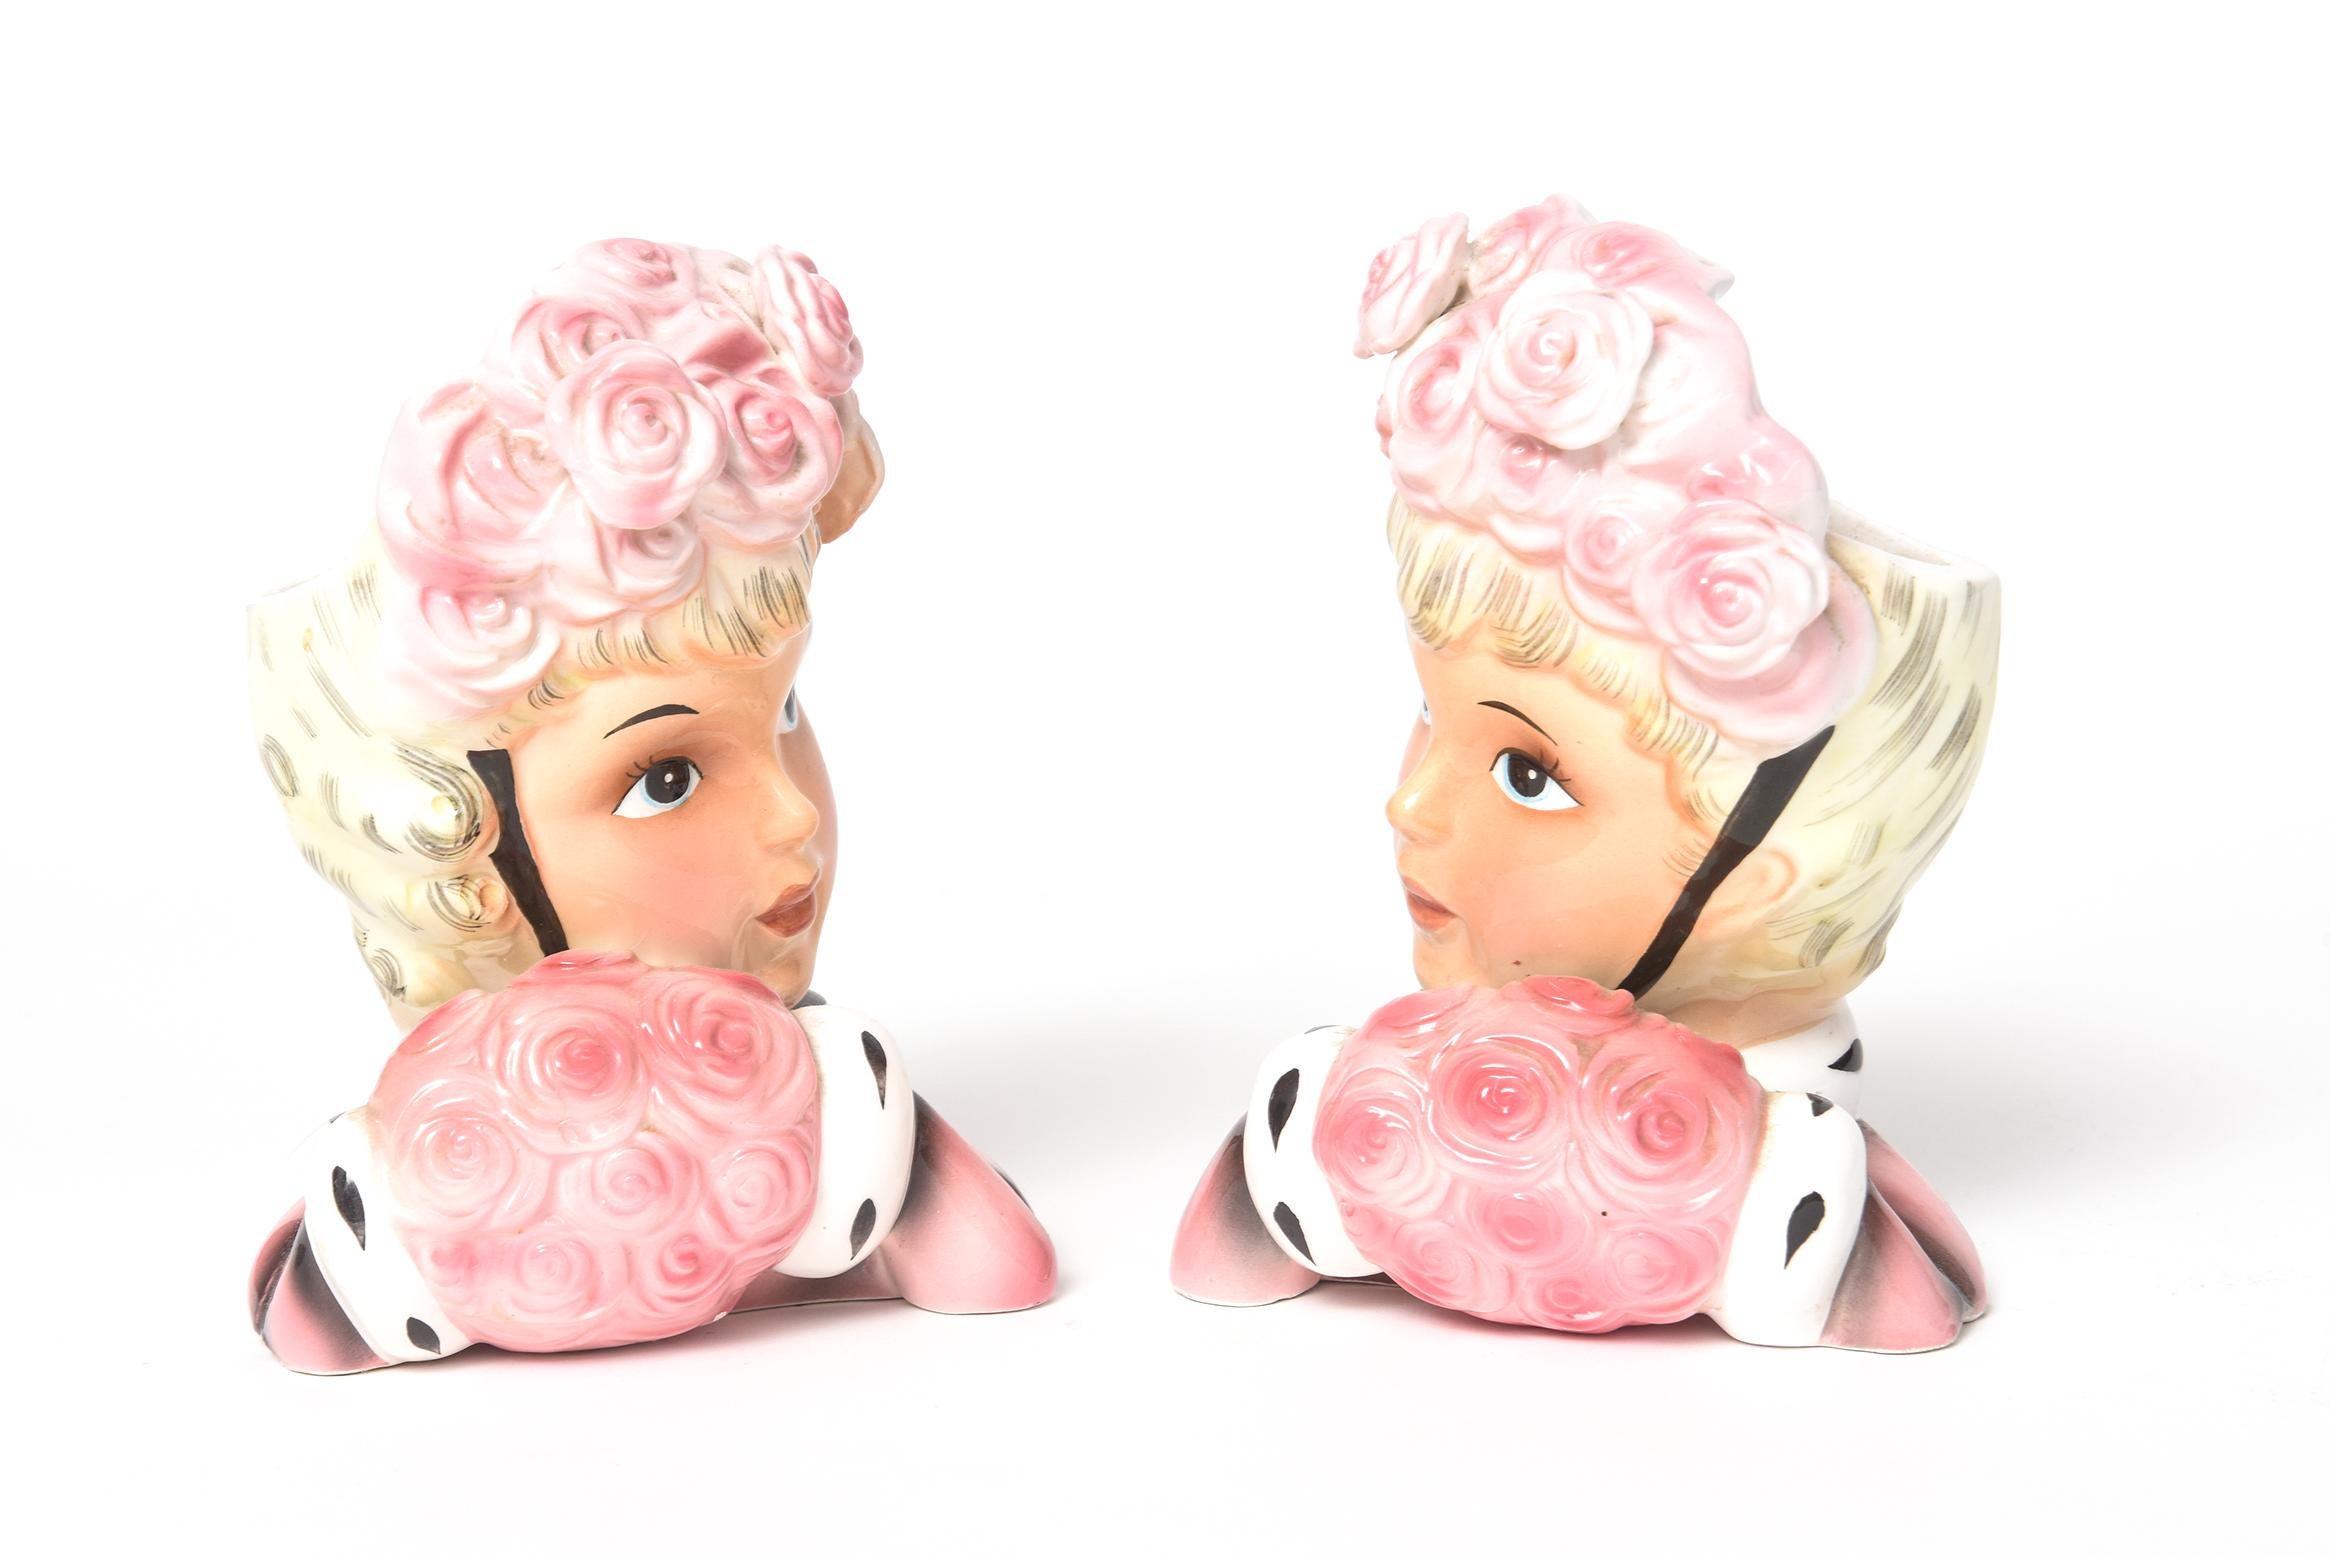 Rare vintage 1950s pair of twin mirror opposite young lady head vases by Enesco head vases. This model is know as 